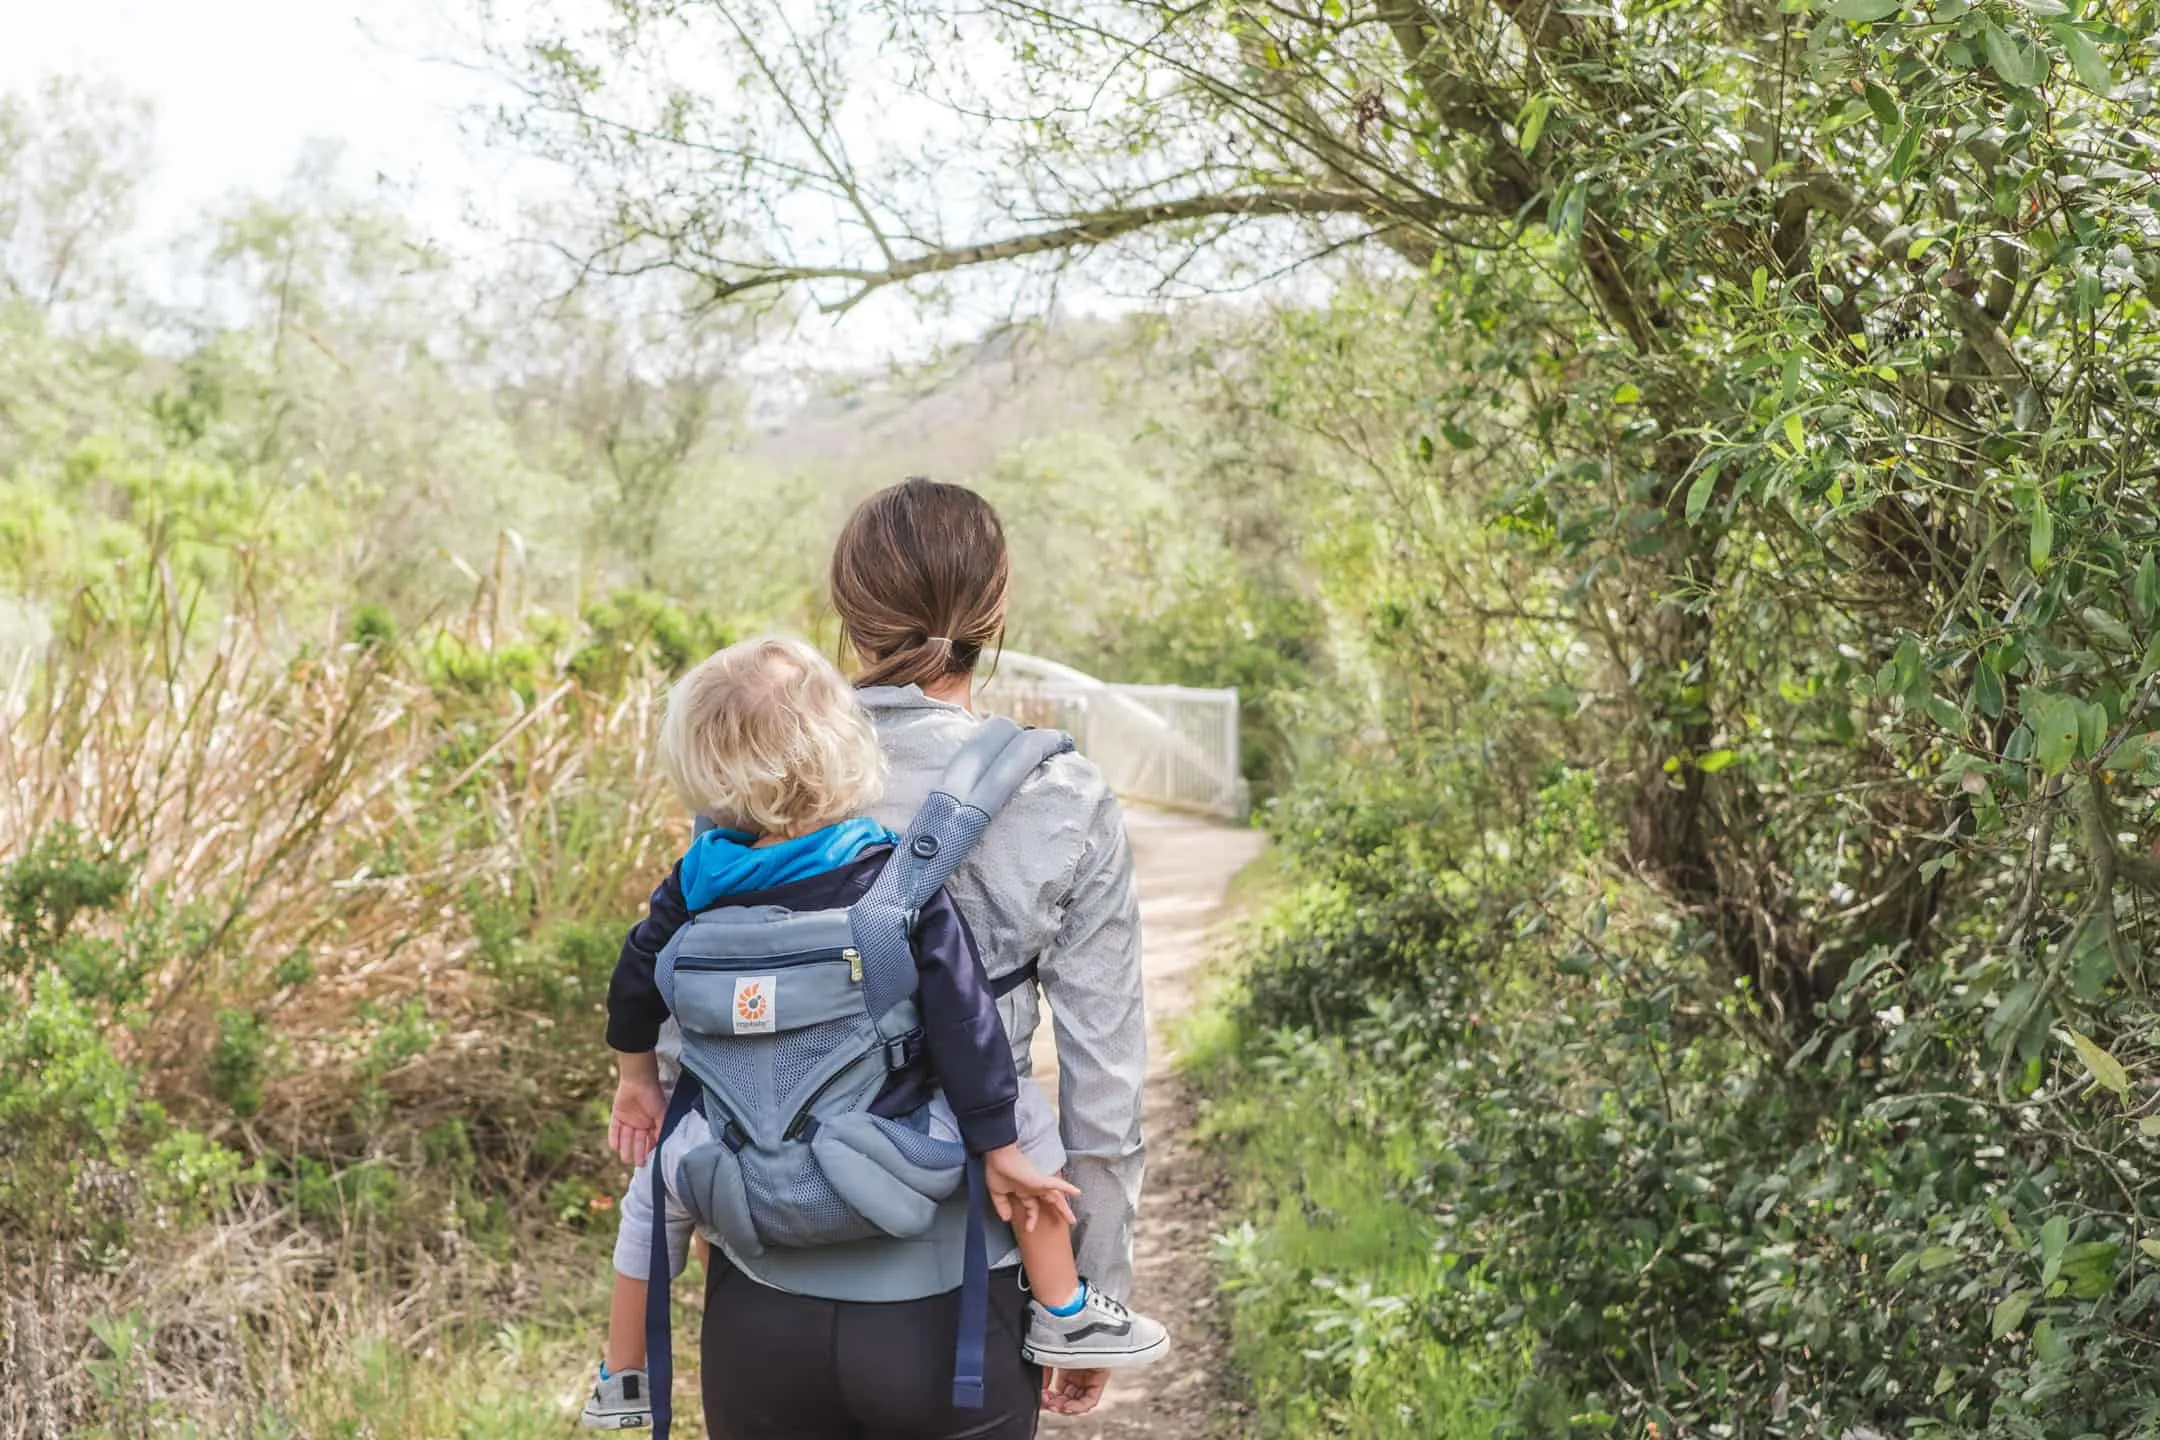 Exploring Southern California with Ergobaby: 5 kid-friendly hikes in Orange County | The new Ergobaby Omni 360 Baby Carrier All-In-One: Cool Air Mesh has become our go-to for our favorite hikes around Southern California. The cool mesh paneling makes it lightweight and breathable. It's perfect for these 5 kid-friendly hikes in Orange County, California. Plus, it carries from infants to toddlers in four different carry positions!